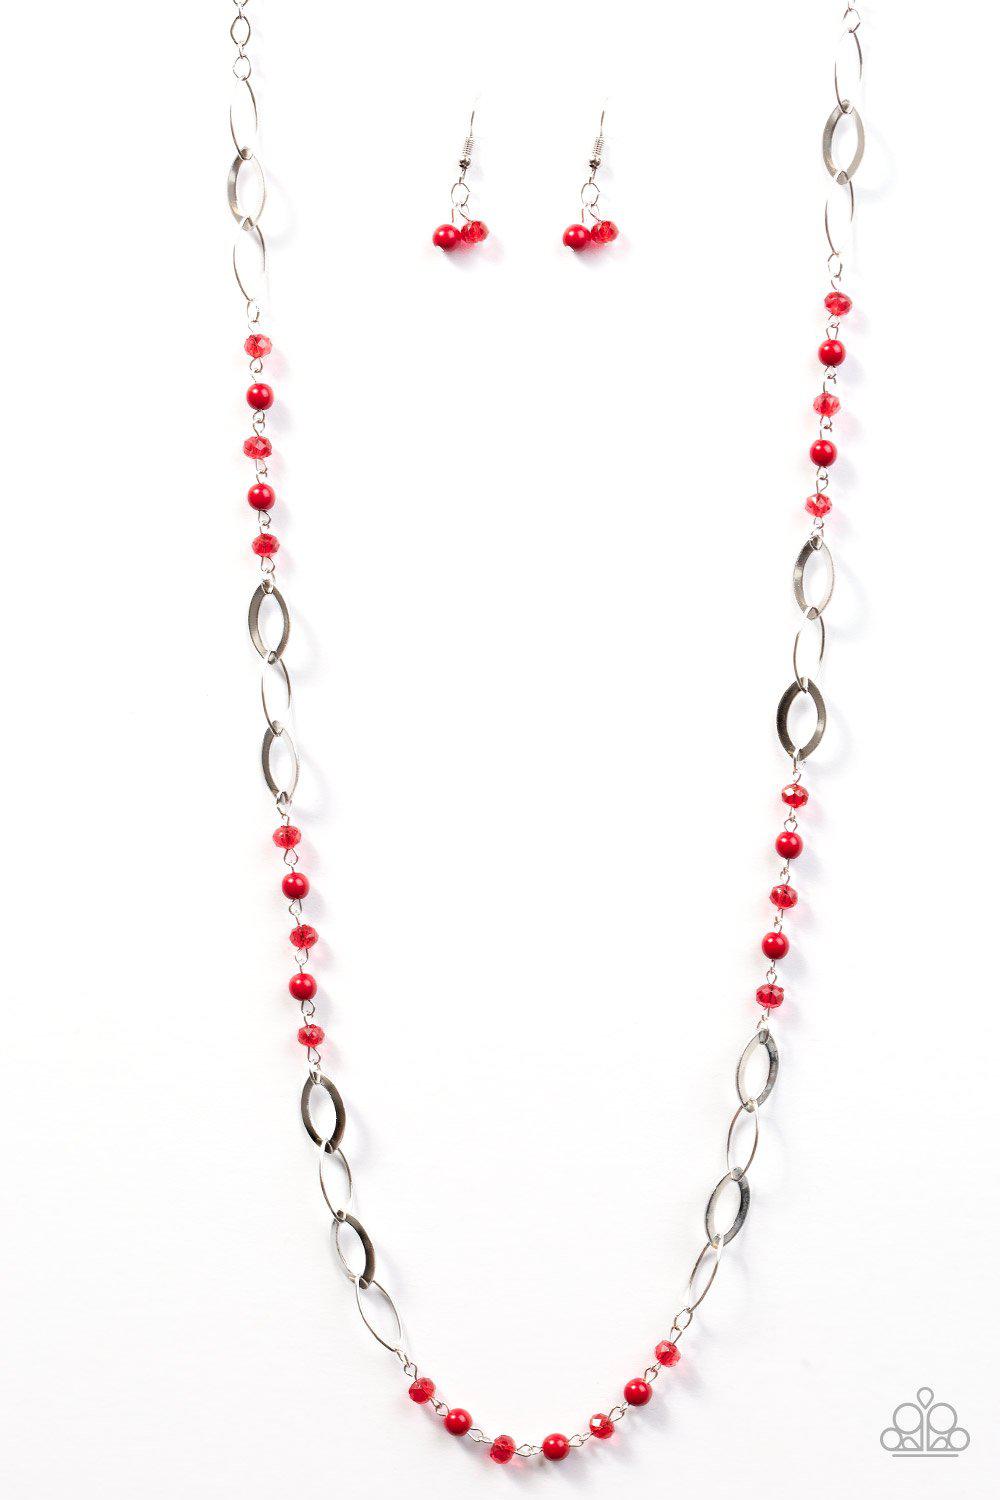 Sparkling Sophistication Red and Silver Necklace - Paparazzi Accessories-CarasShop.com - $5 Jewelry by Cara Jewels